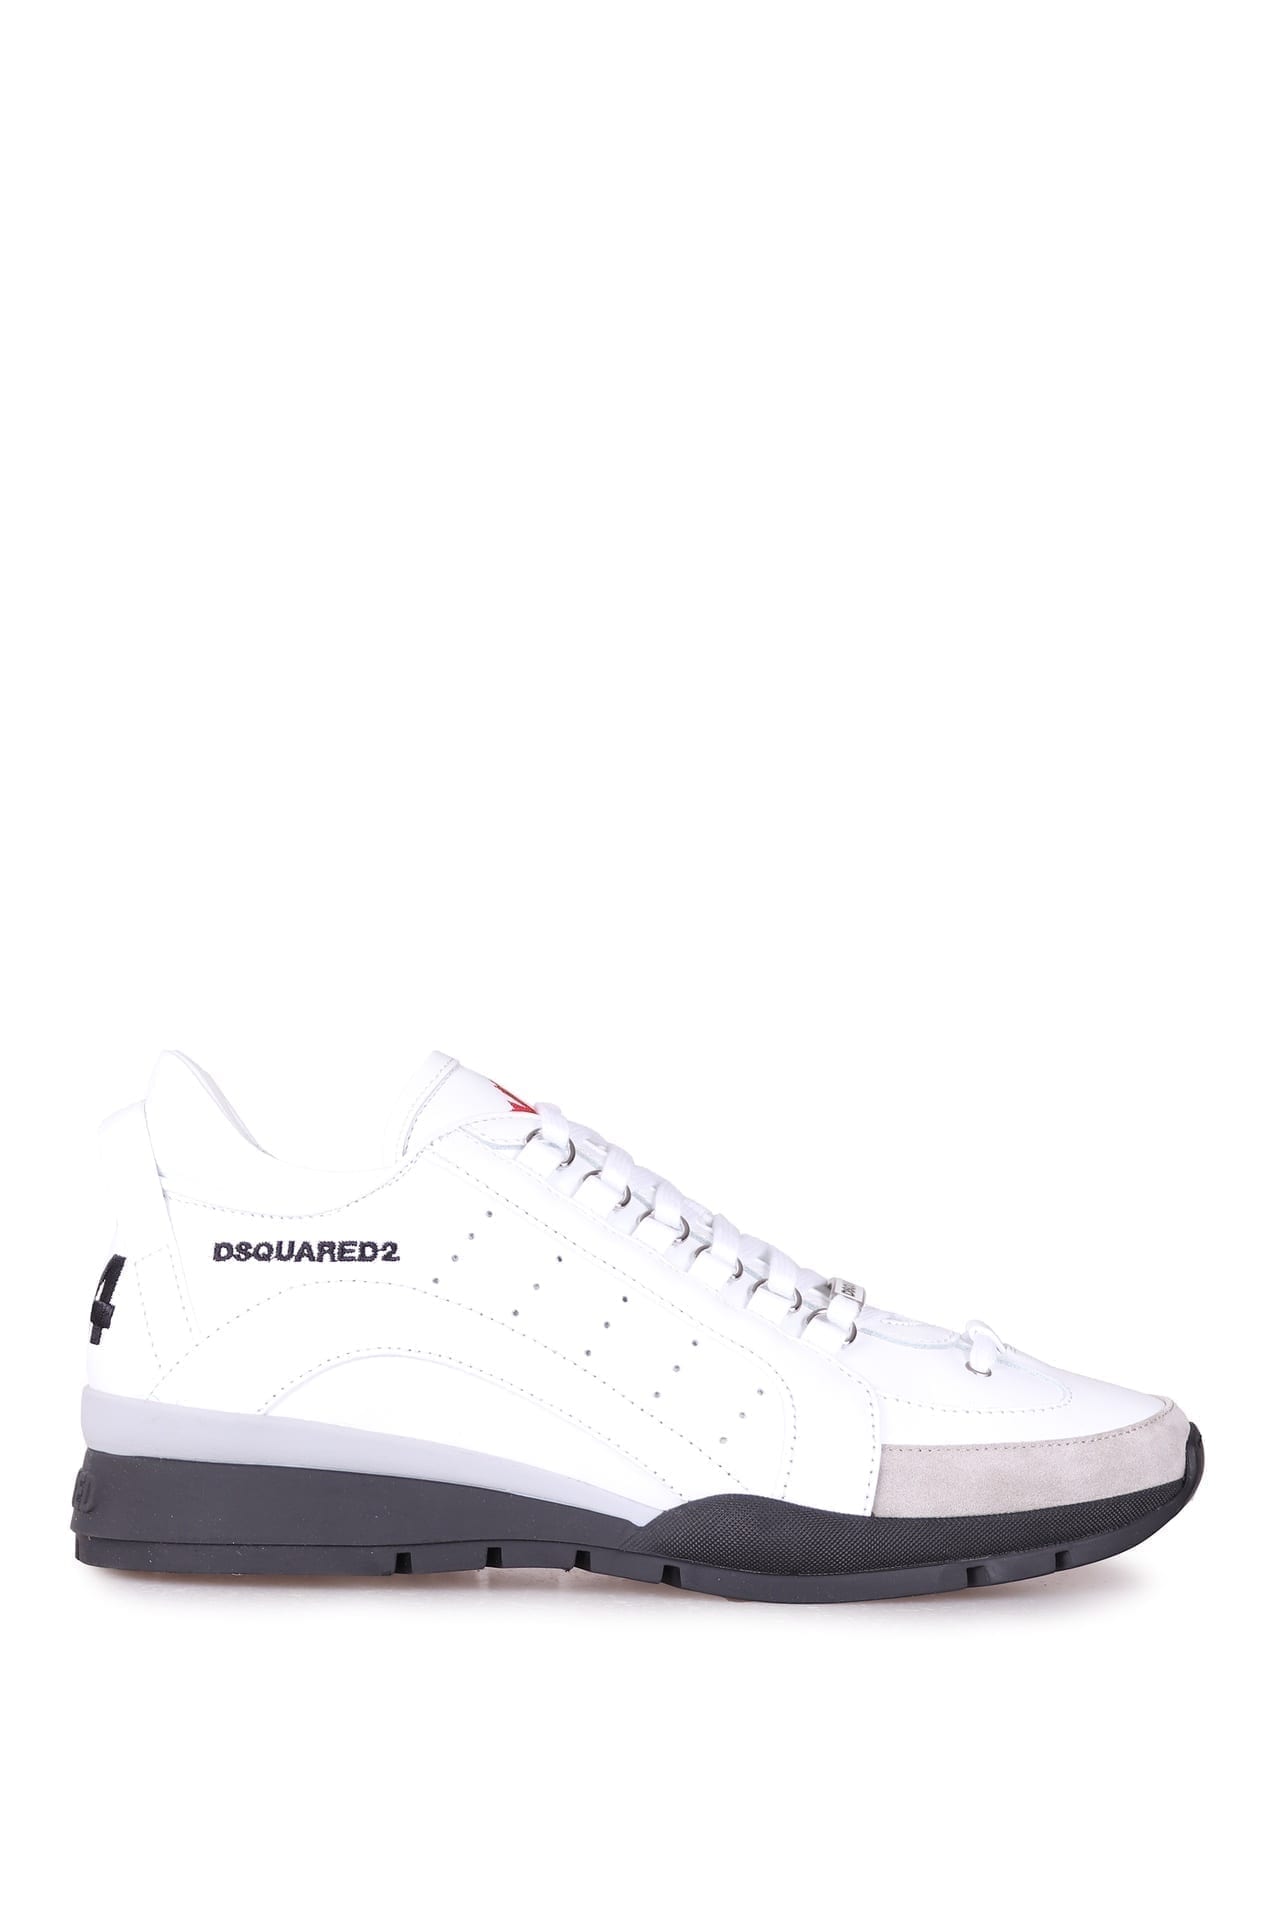 dsquared2 shoes canada